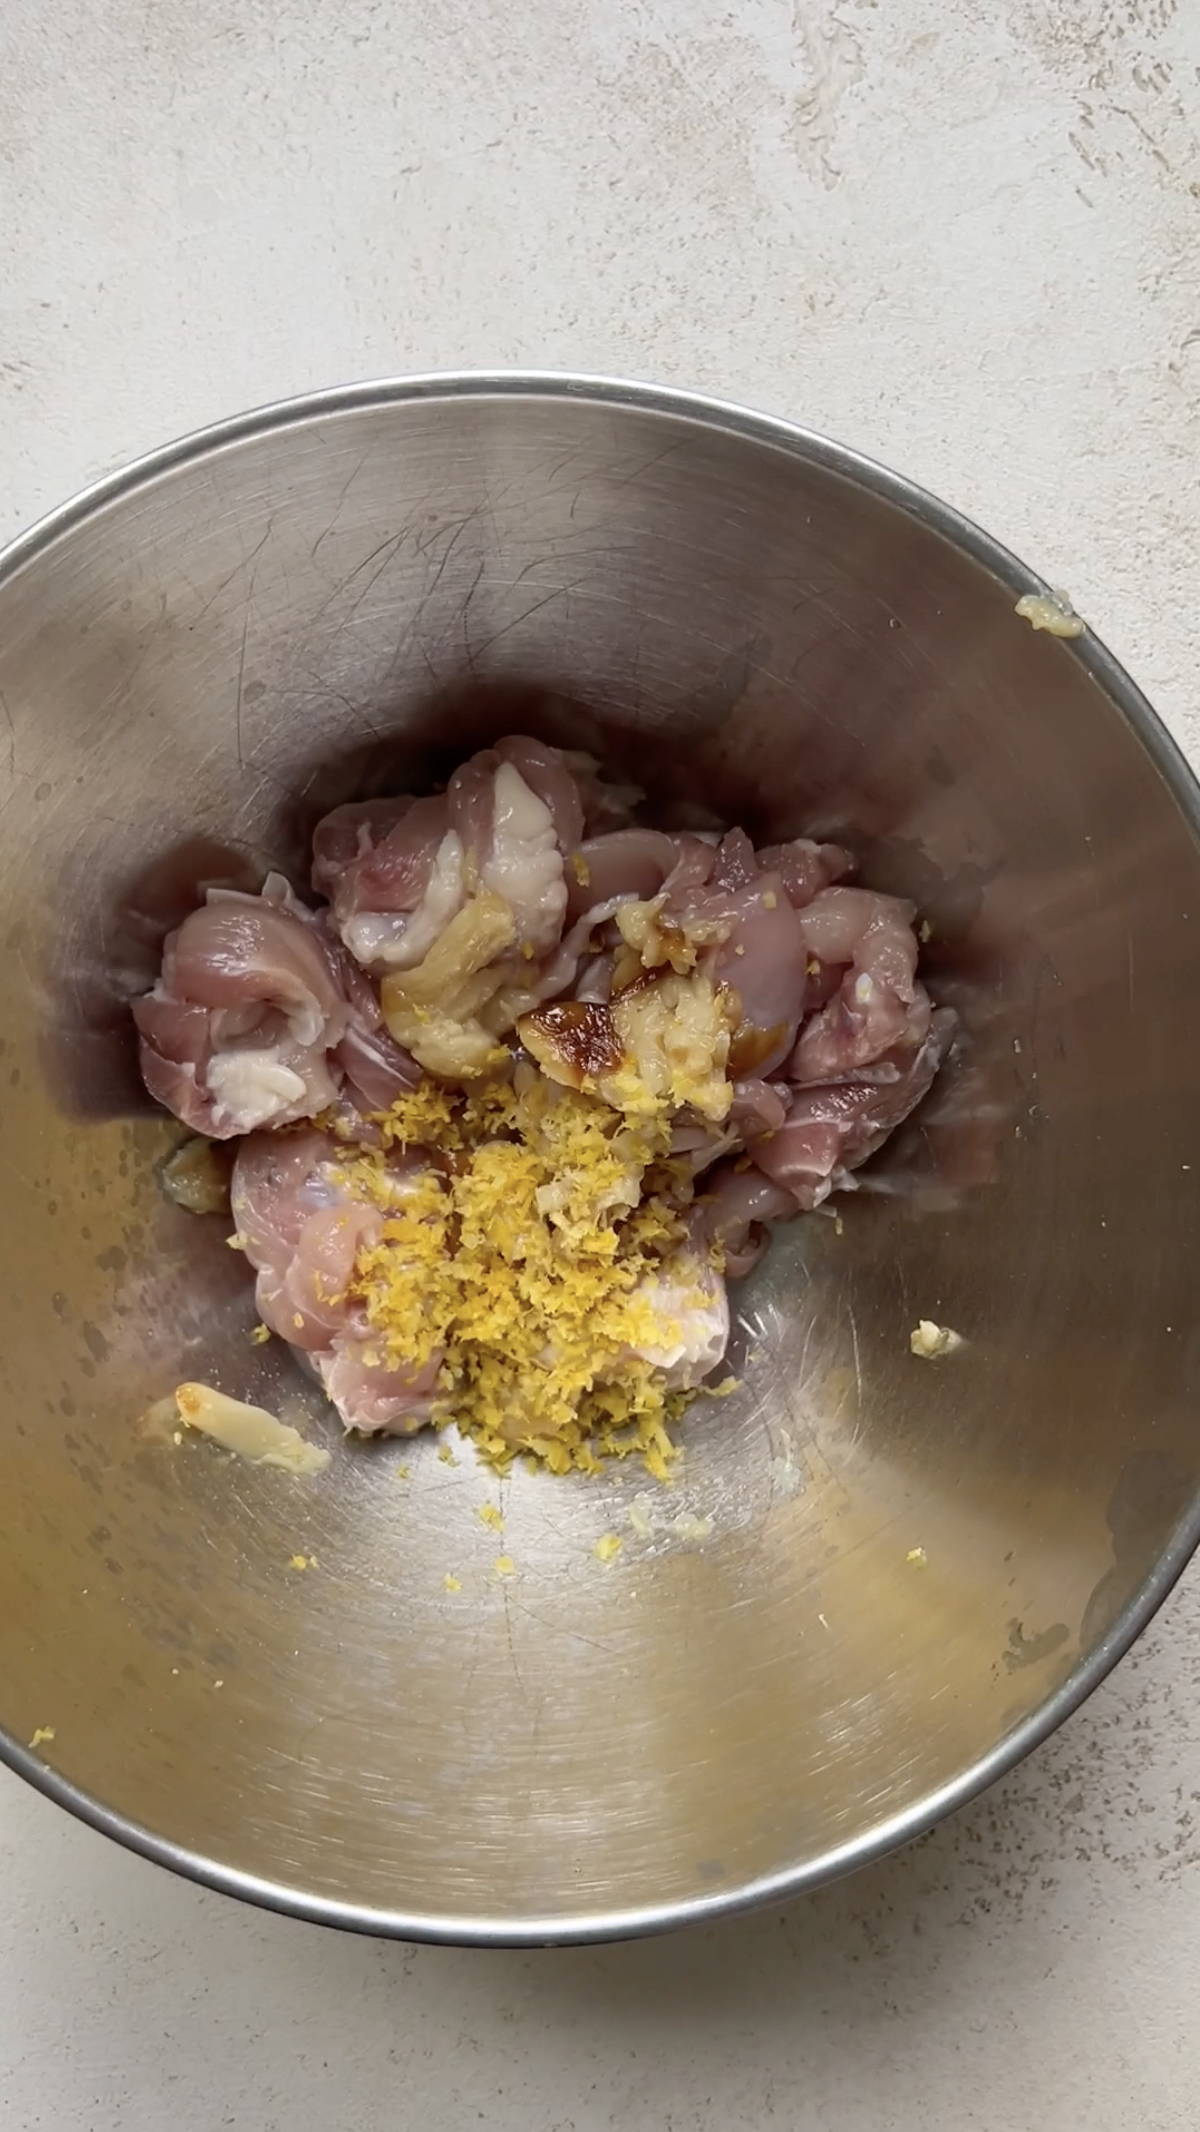 Chicken pieces and lemon zest in a stainless steel bowl.